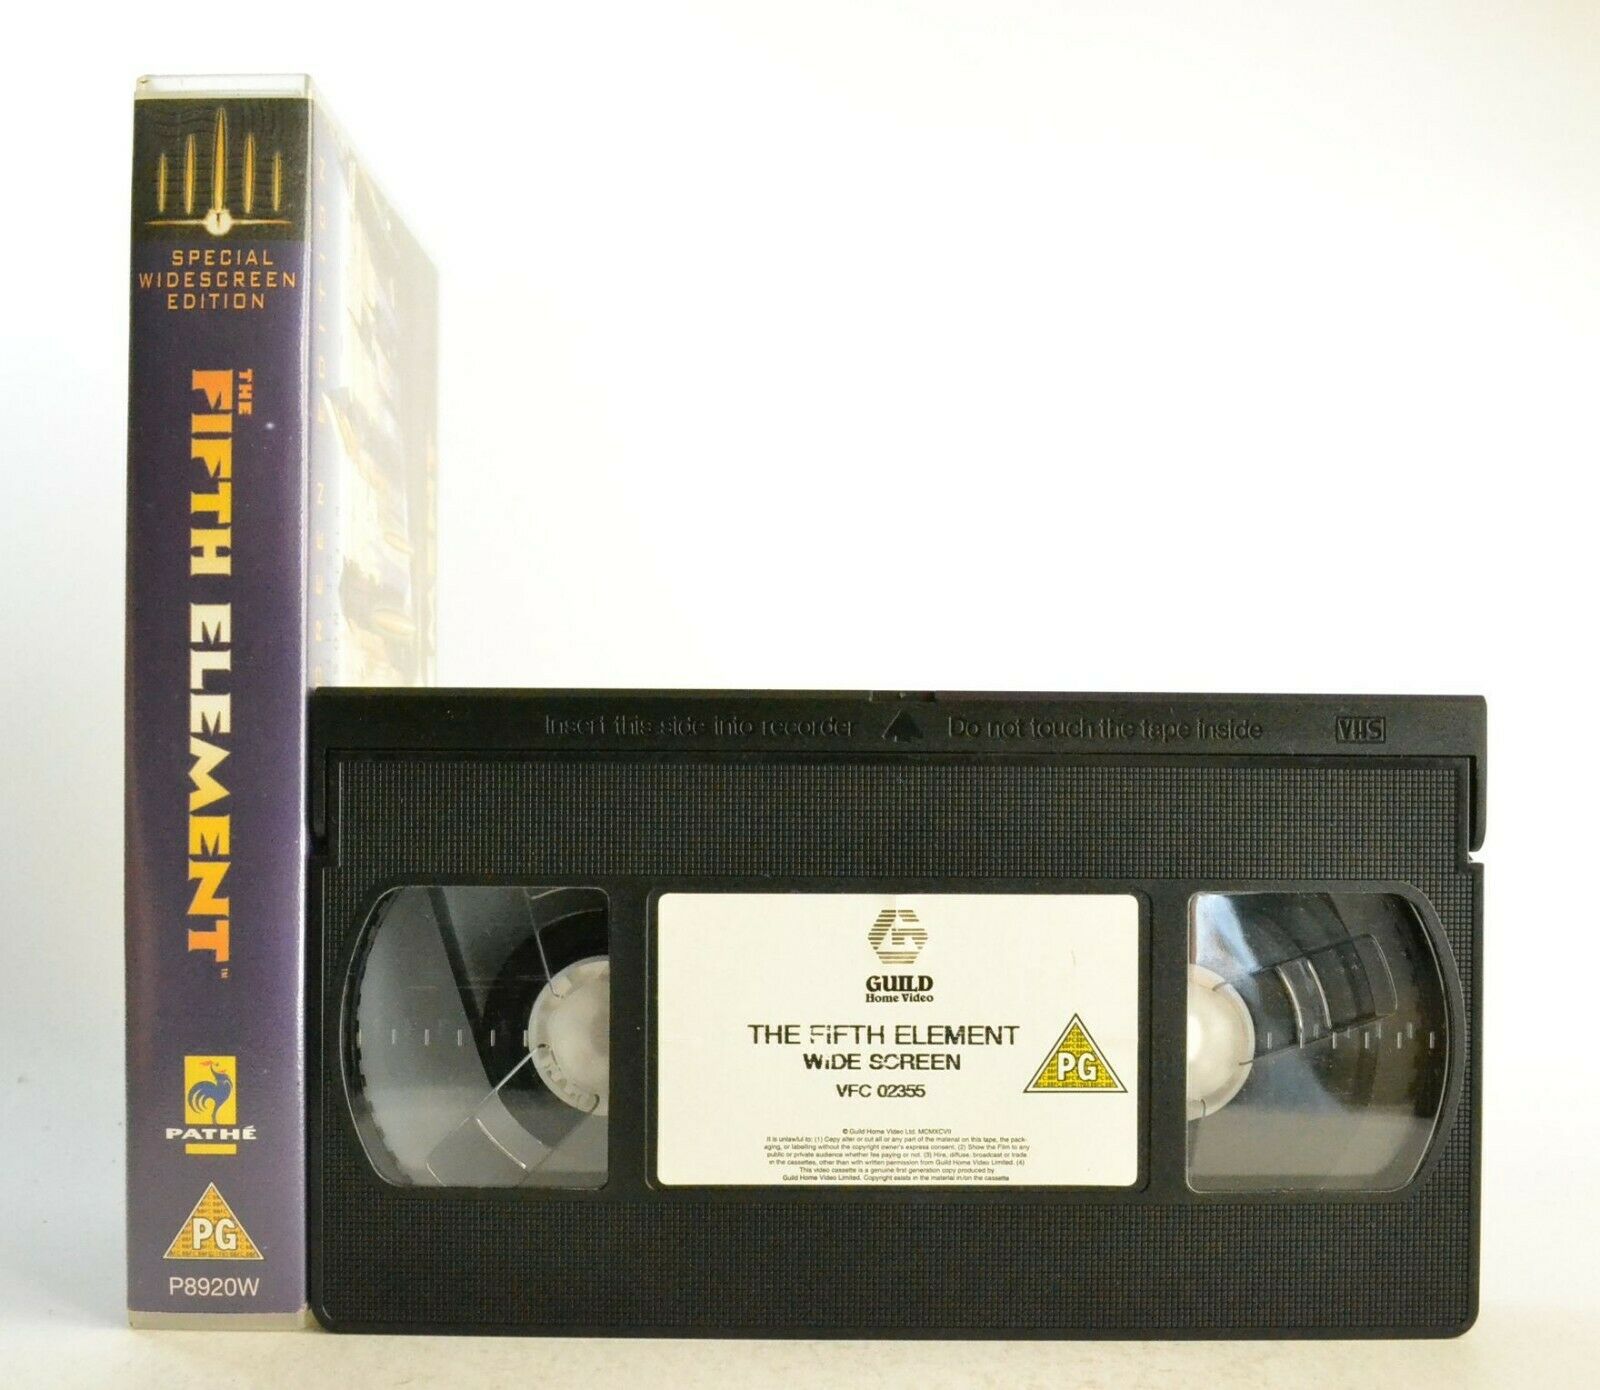 The Fifth Element: Luc Besson Film (1997) - Bruce Willis - Sci-Fi/Action - VHS-